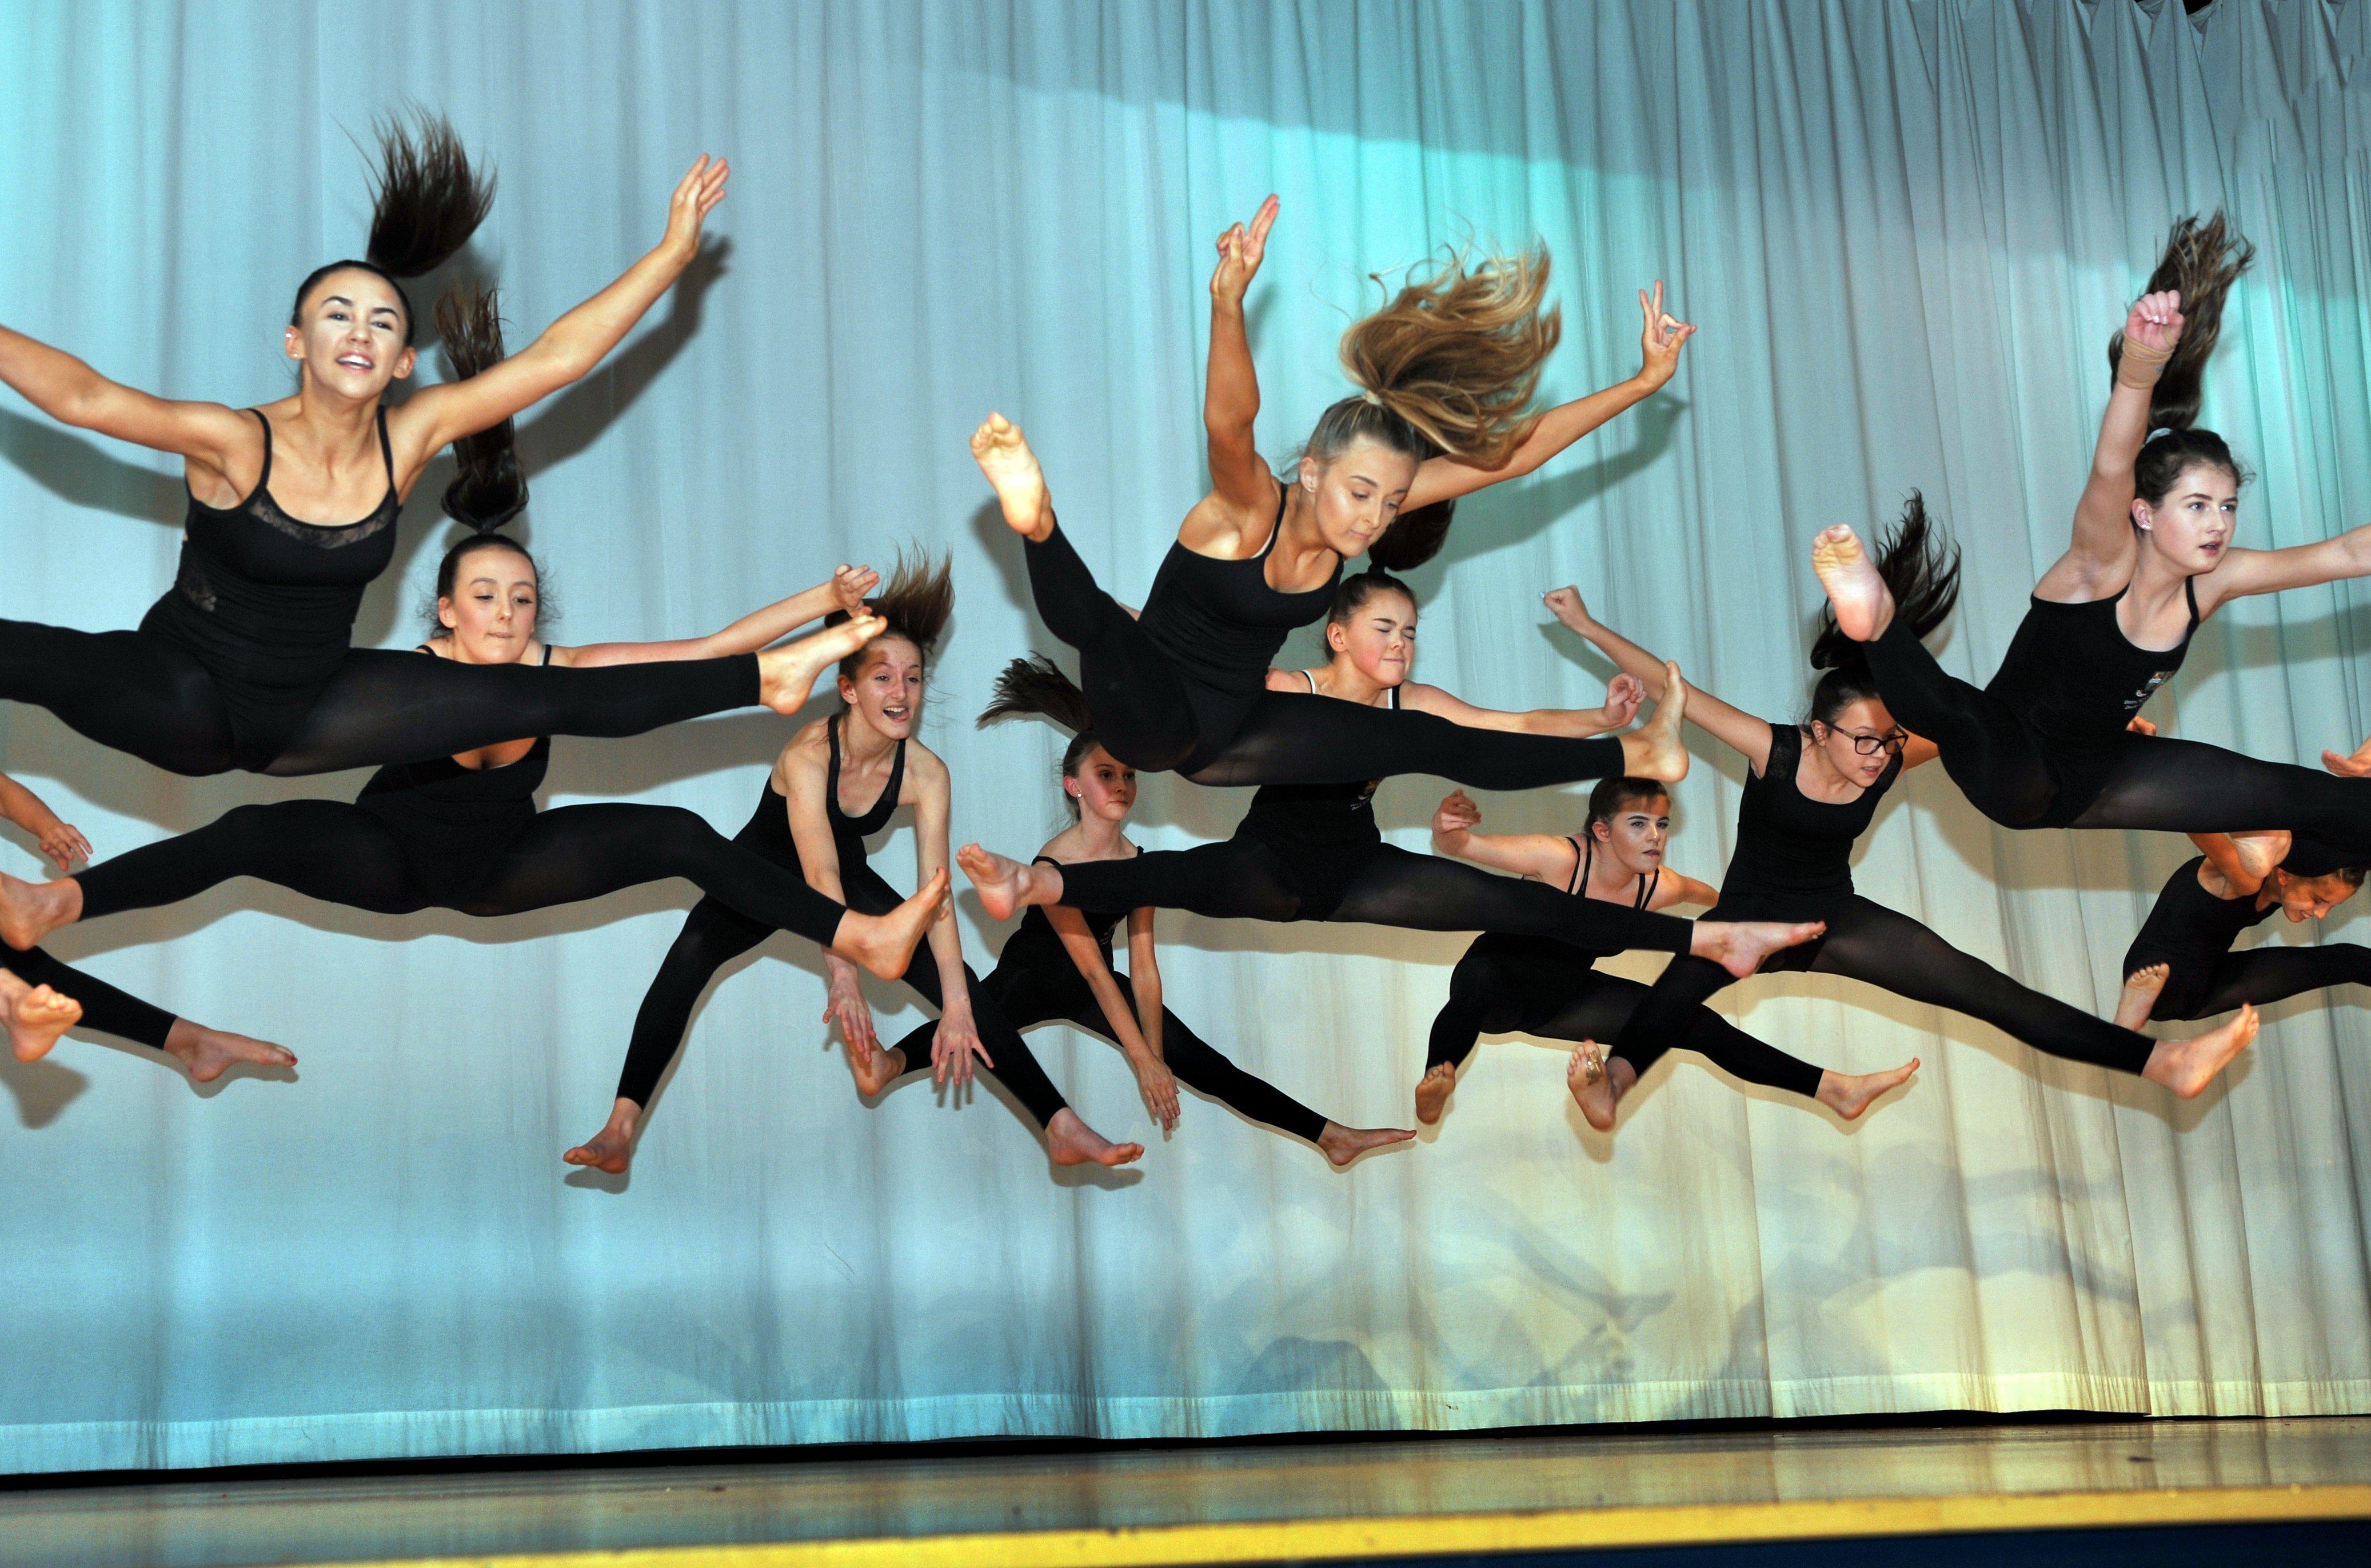 Denny High School annual inter-house dance-off. Guest Act - DHS Cheer Team. Picture by Roberto Cavieres.